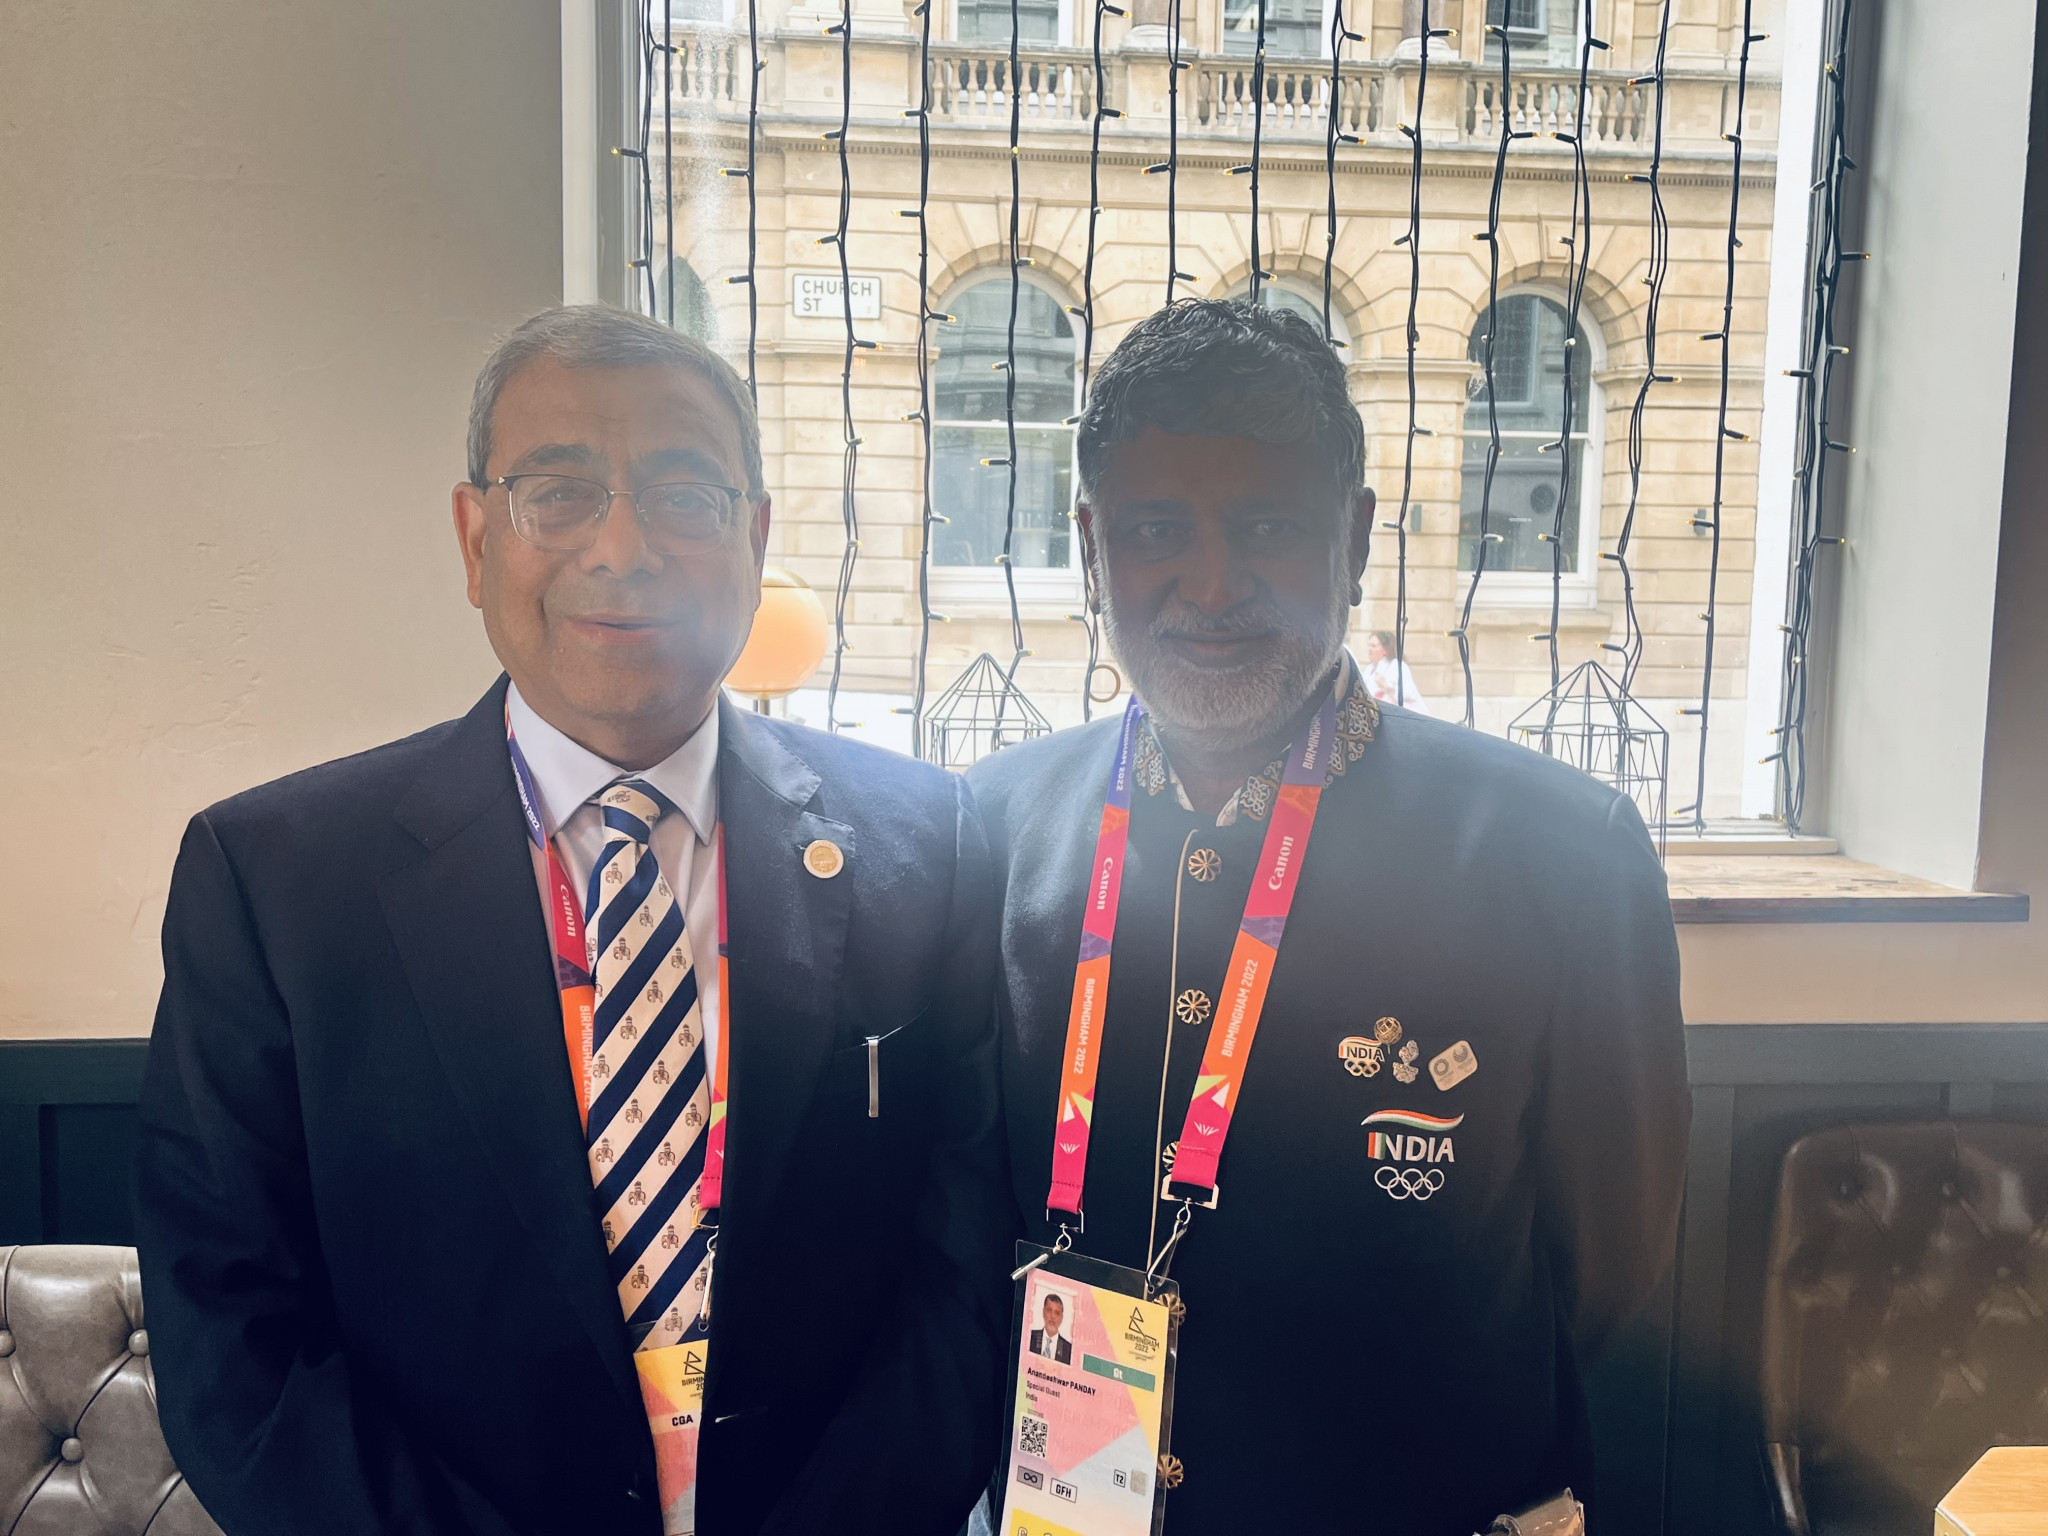 Anil Khanna, left, who was part of the Indian delegation at the Birmingham 2022 Commonwealth Games, stepped down as IOA Acting President ©ITG